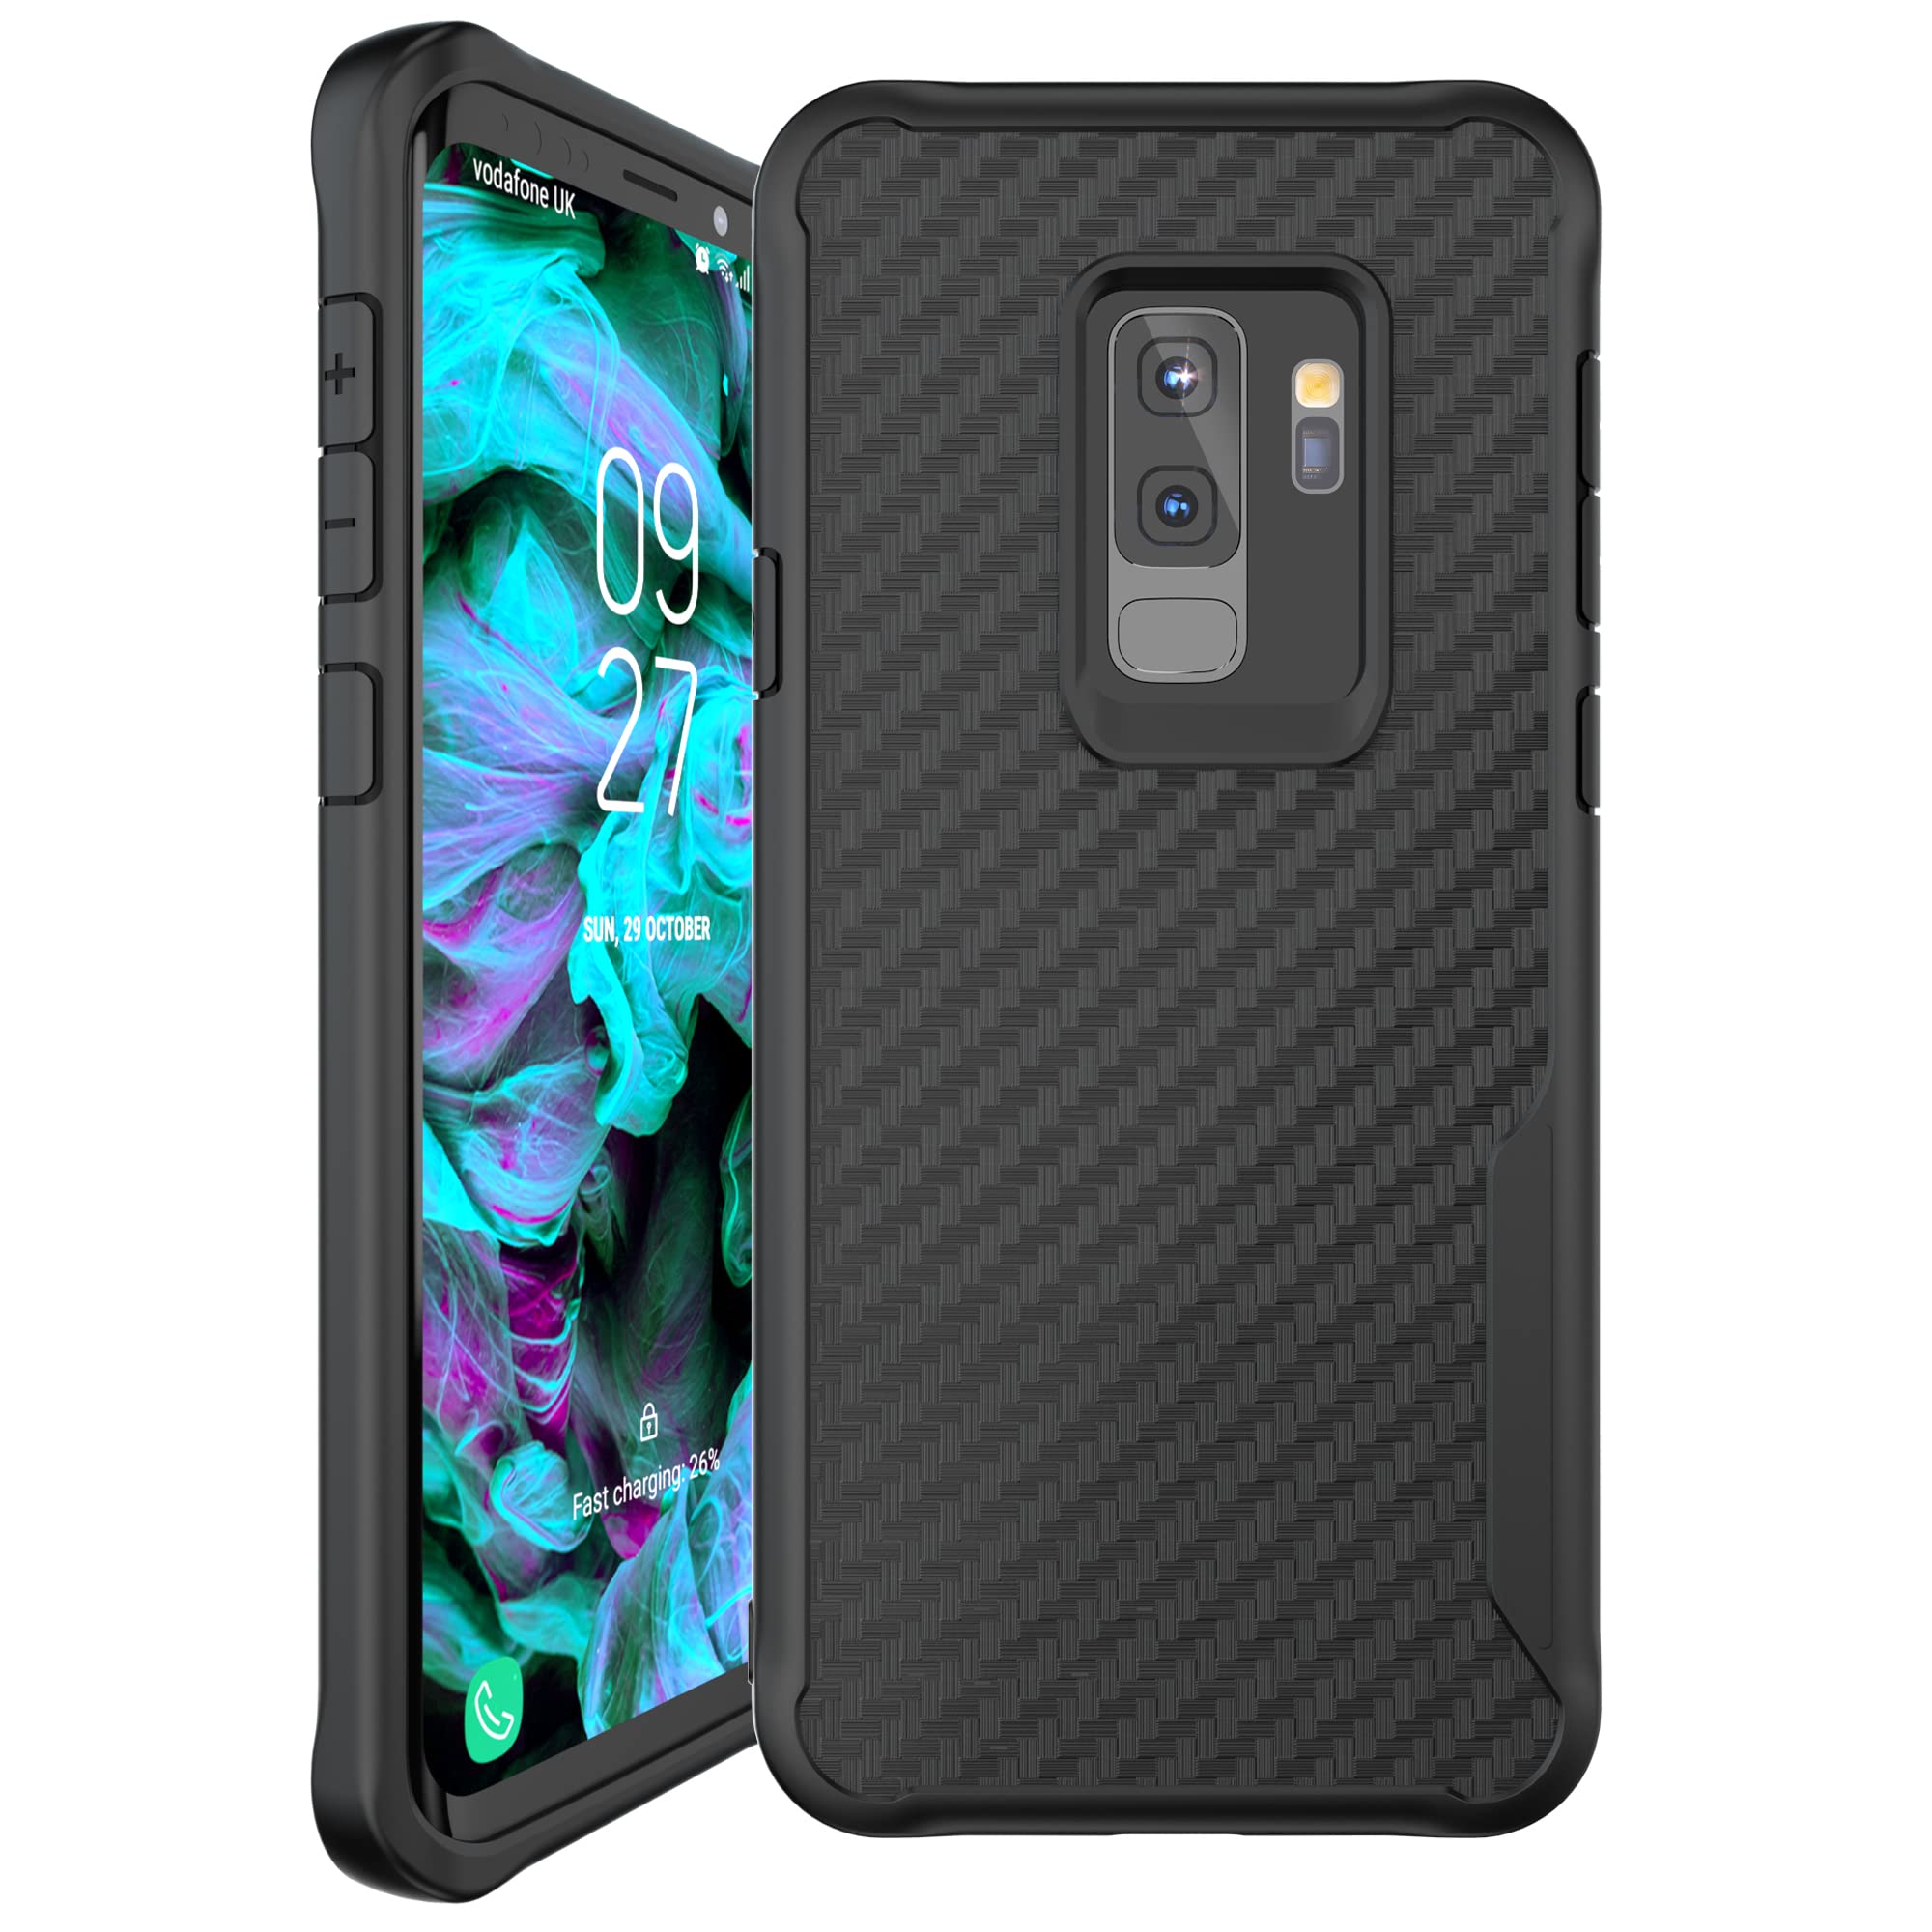 Carbon Fiber Pattern Slim Case Compatible with Samsung Galaxy S9 Plus, Shockproof 10ft. Drop Tested, Wireless Charging Compatible - Black